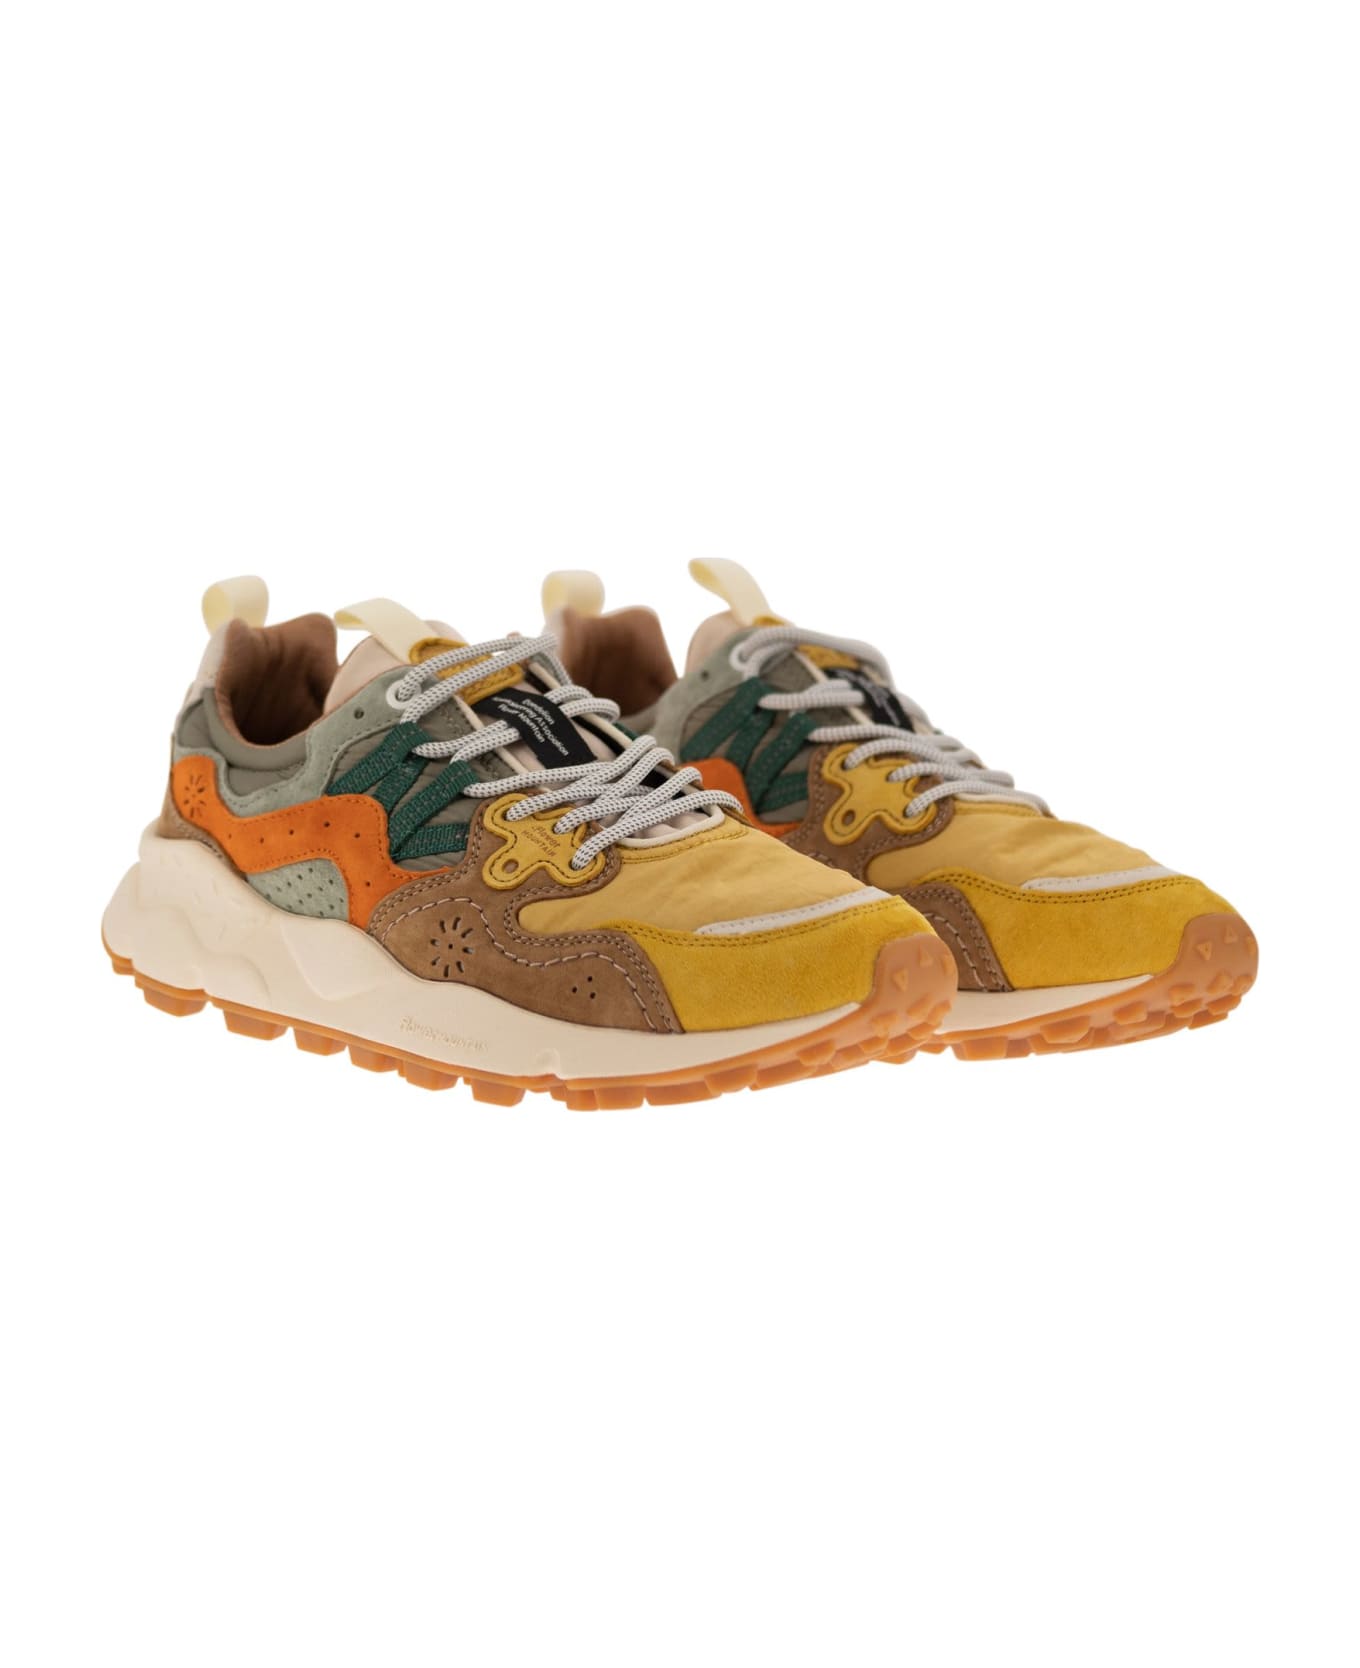 Flower Mountain Yamano 3 - Sneakers In Suede And Technical Fabric - Orange/military スニーカー